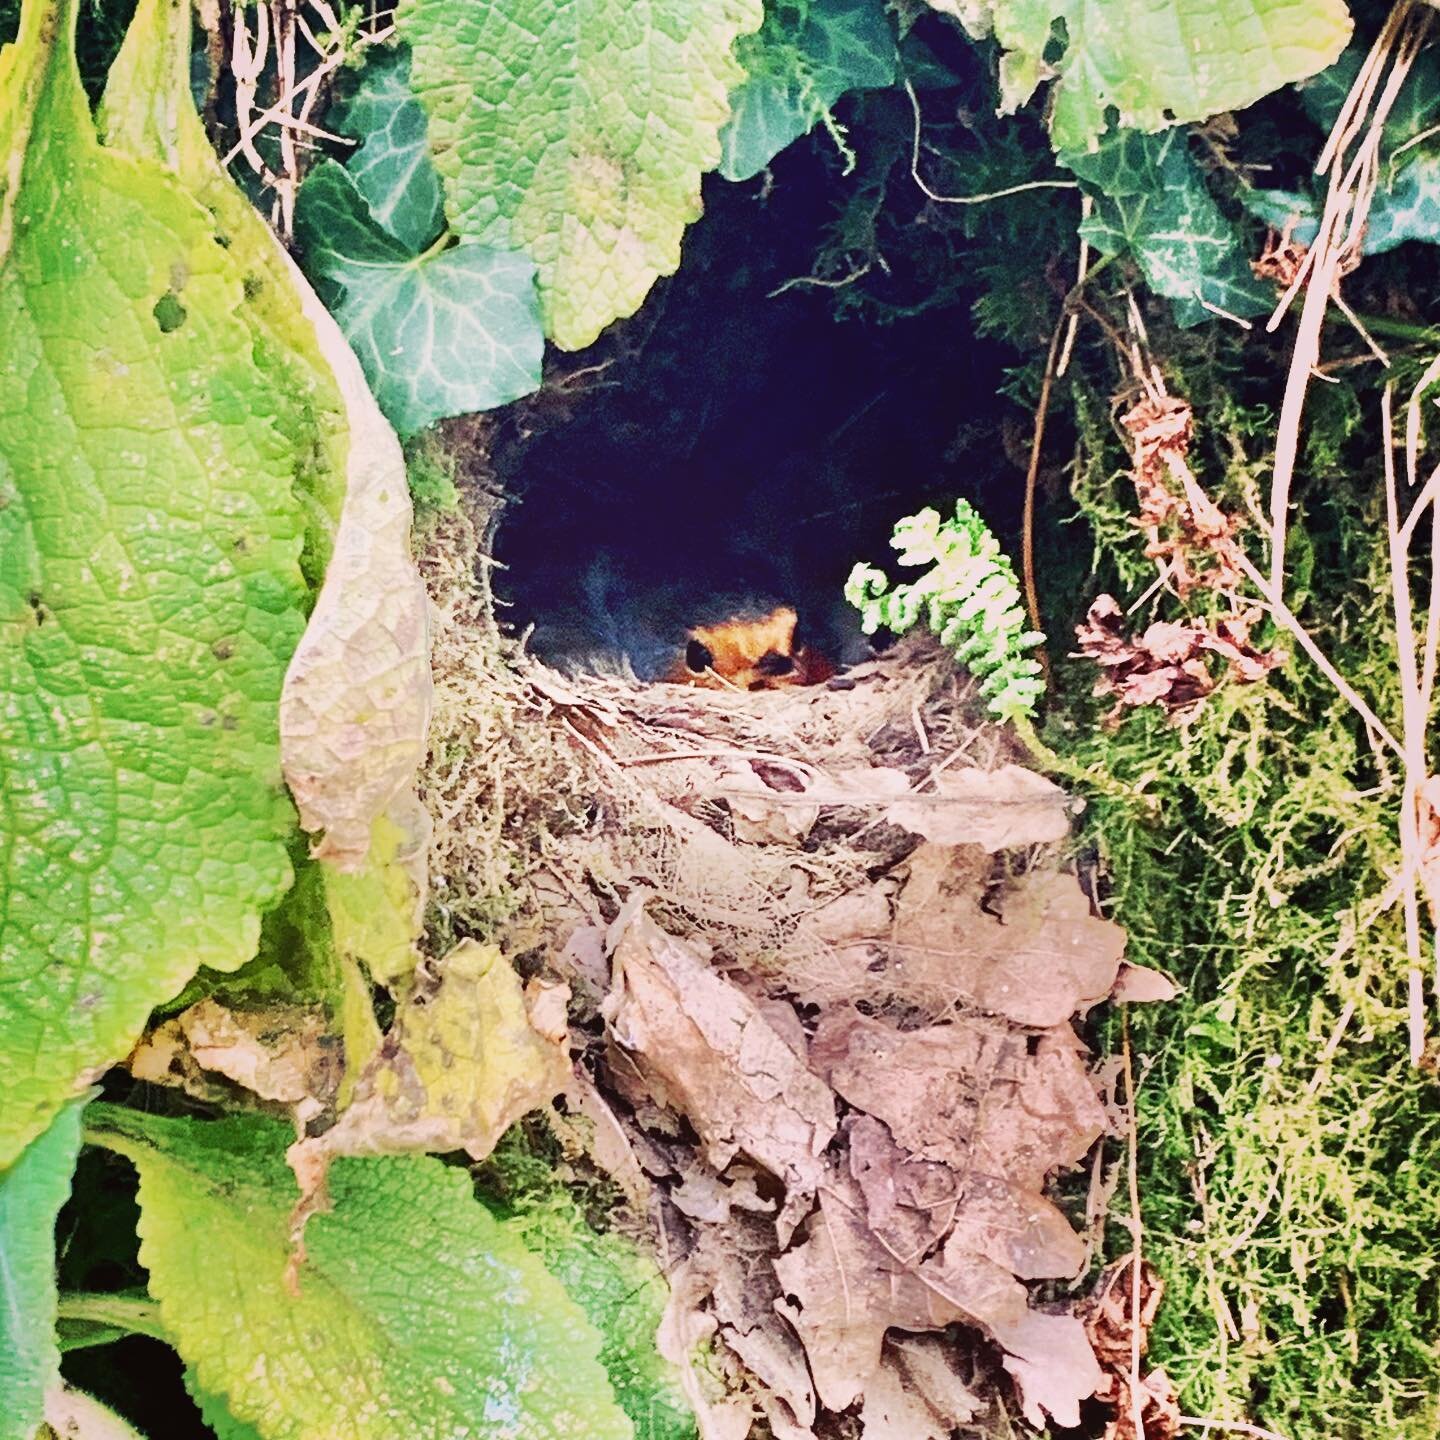 Can you spot robin redbreast sitting on her hidden nest? She then flew off to go and catch things for her 6 tiny bald headed hatchlings